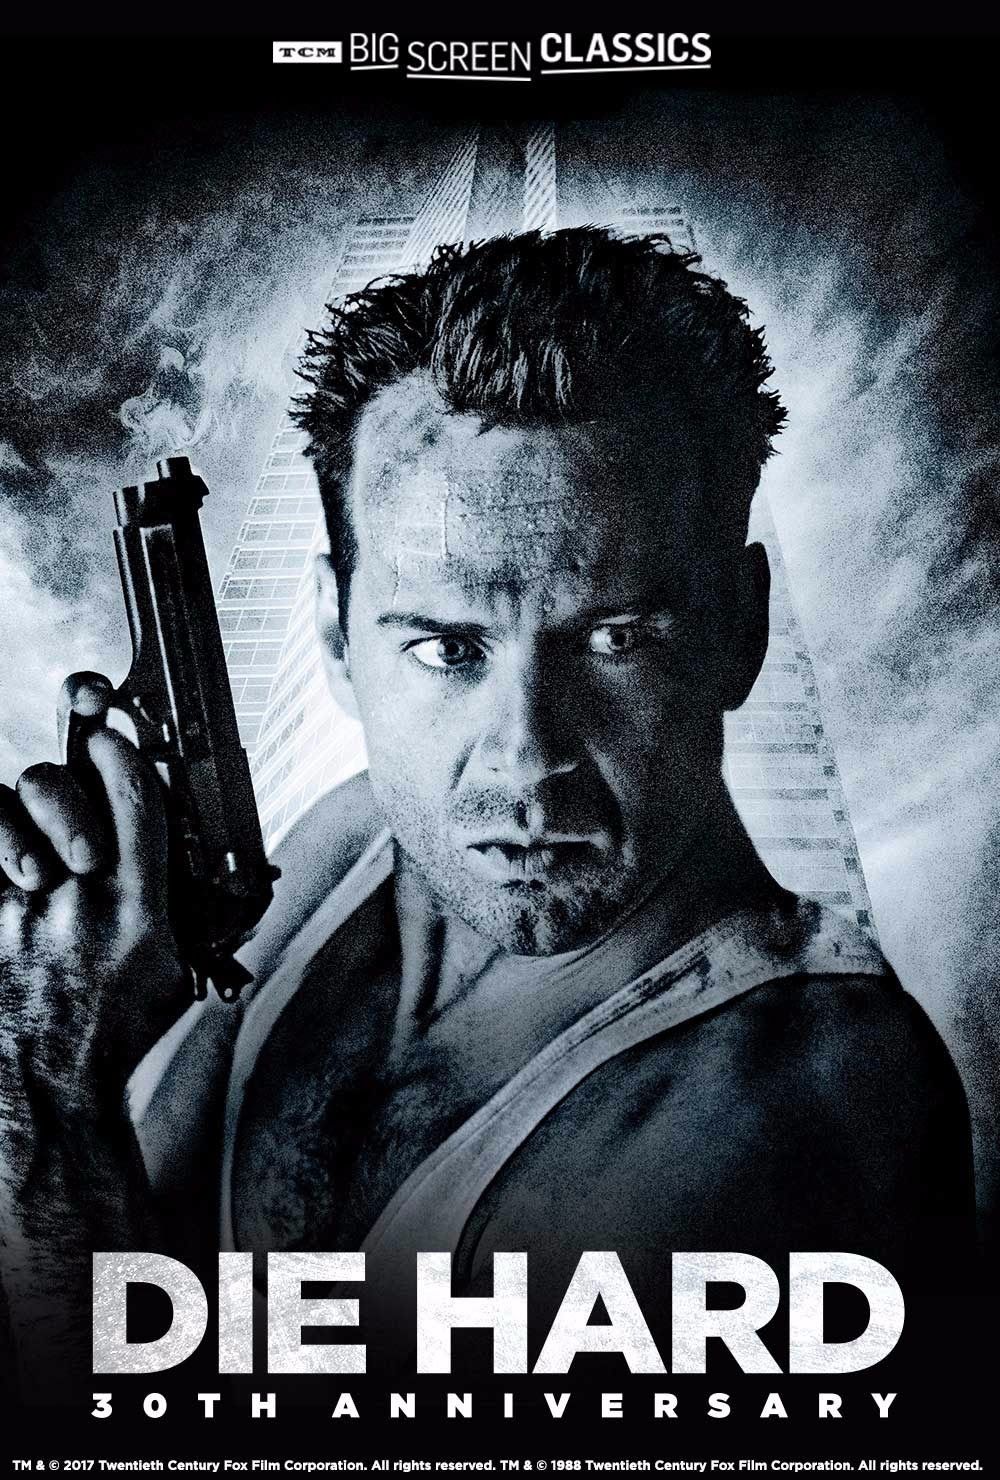 Die Hard Celebrates 30th Anniversary with a Return to Theaters